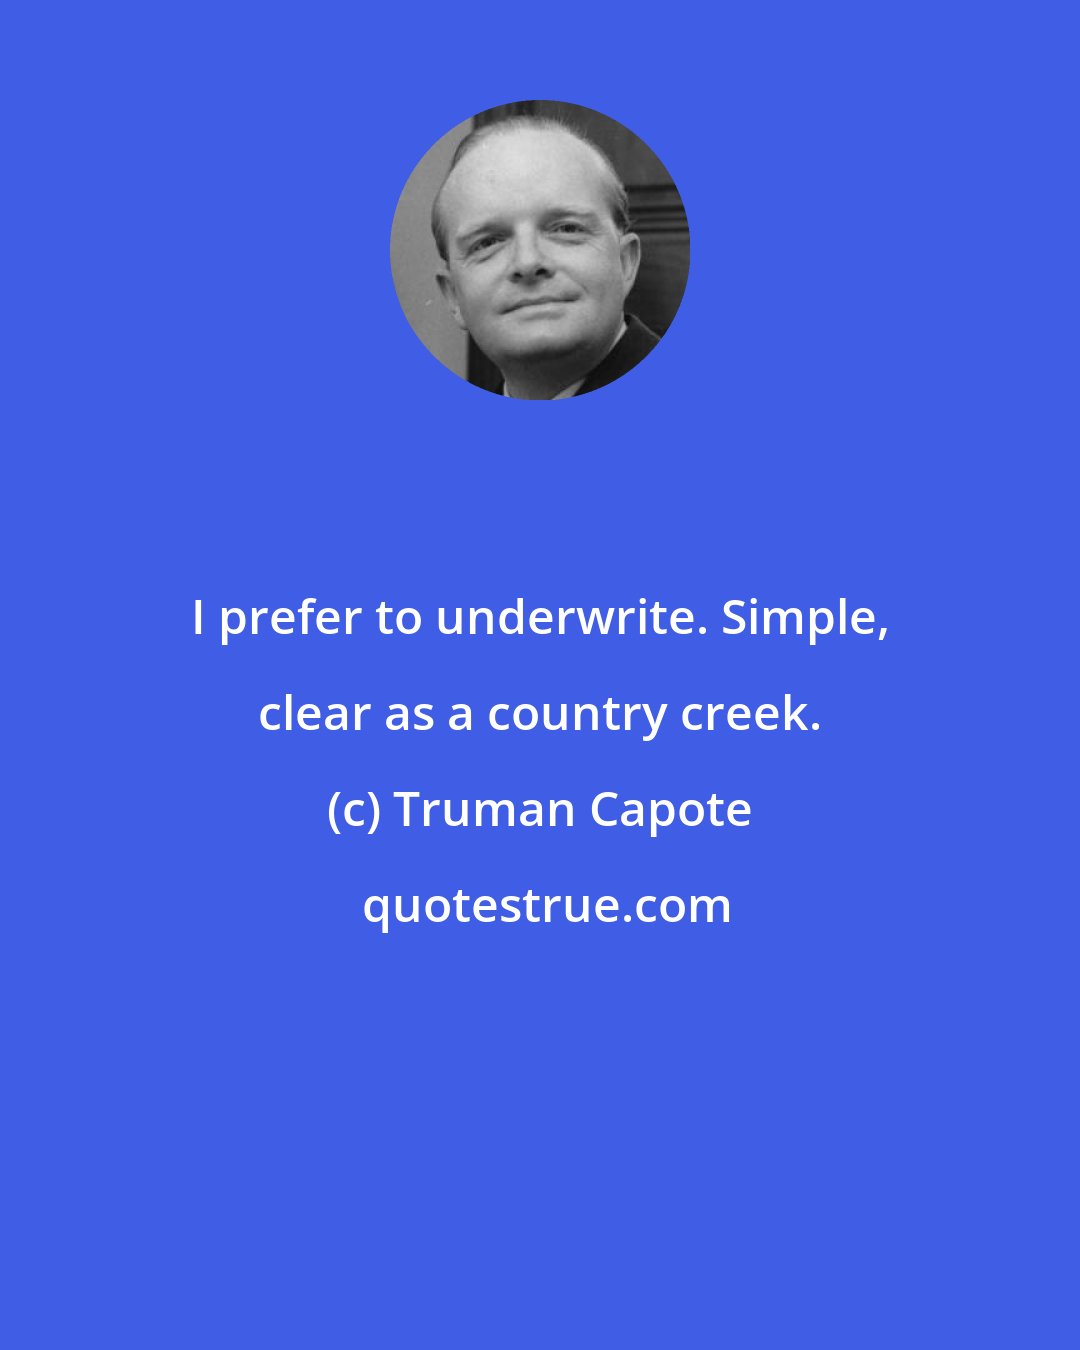 Truman Capote: I prefer to underwrite. Simple, clear as a country creek.